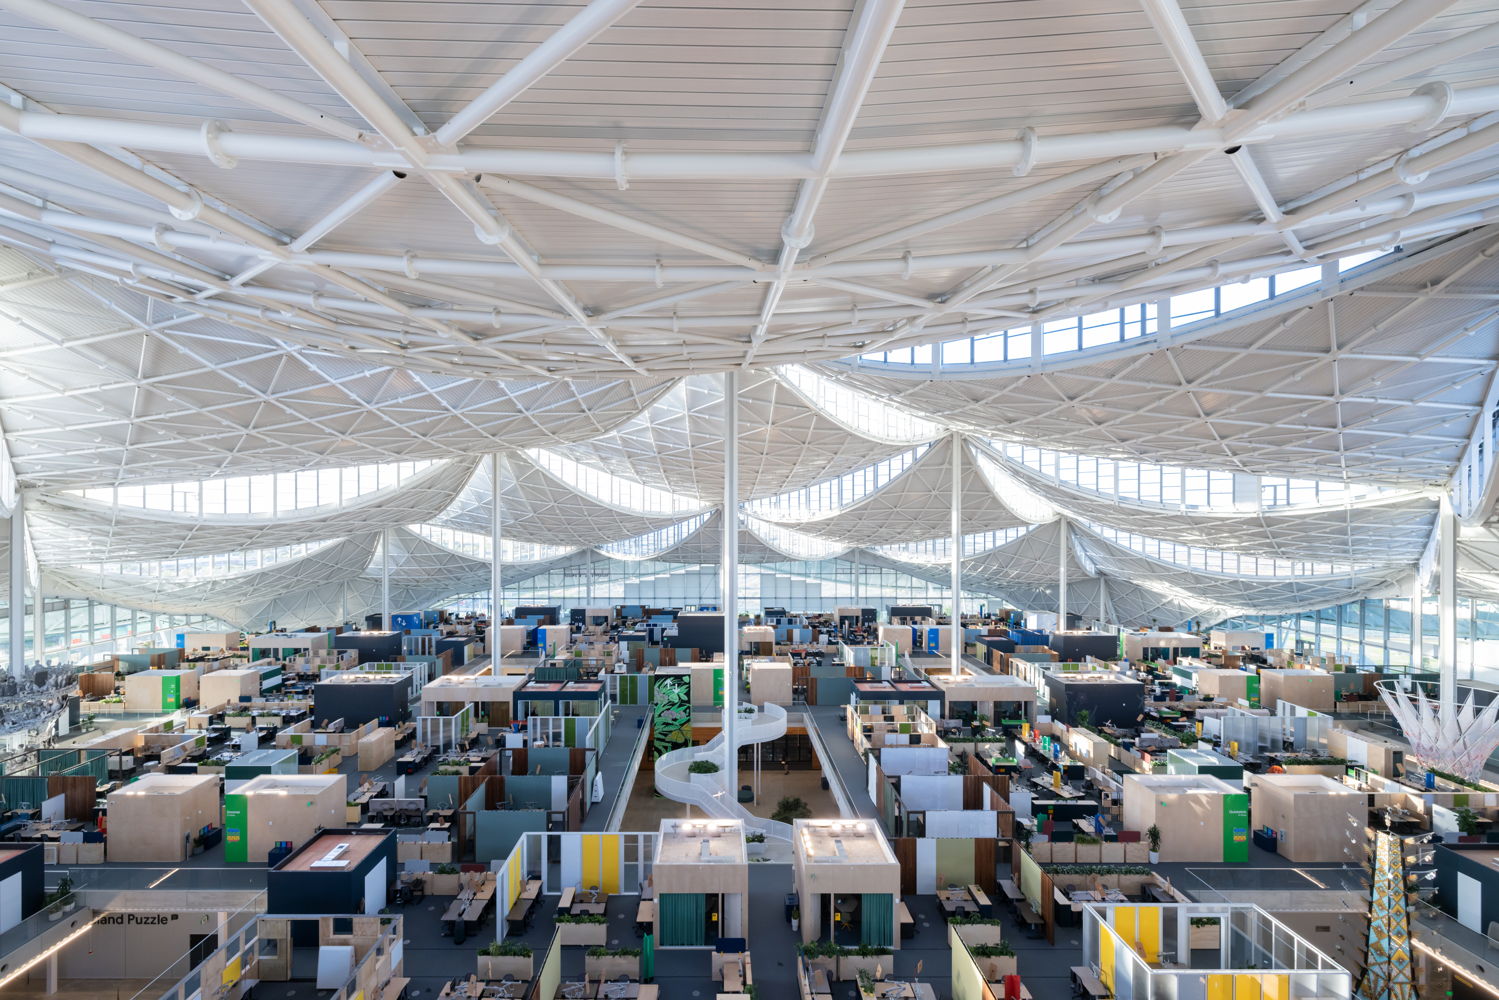 A bird’s-eye view of the second floor workspace at Bay View shows how thousands of Googlers can be in a connected space with individual team neighborhoods under an inspiring canopy. (Photo: Iwan Baan)